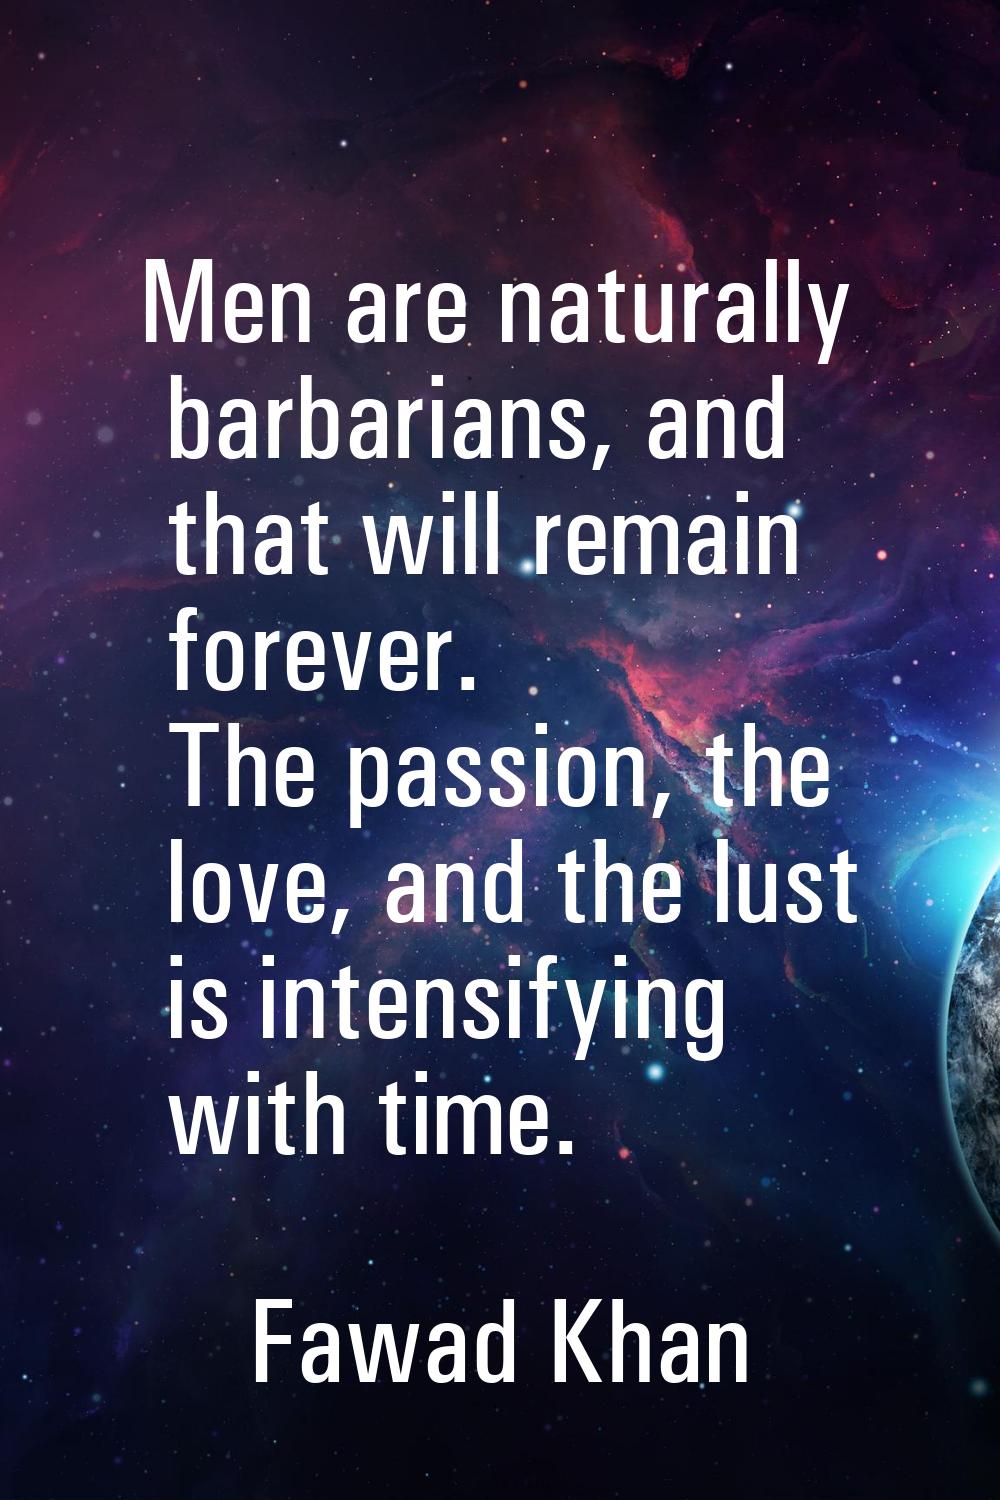 Men are naturally barbarians, and that will remain forever. The passion, the love, and the lust is 